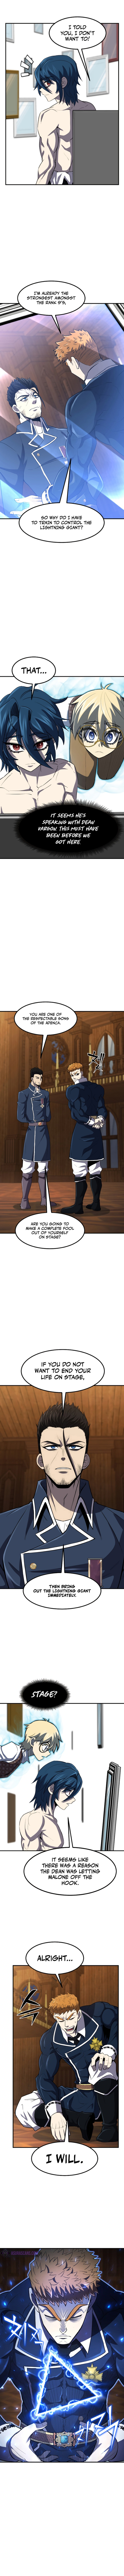 Standard of Reincarnation - Chapter 34 Page 7